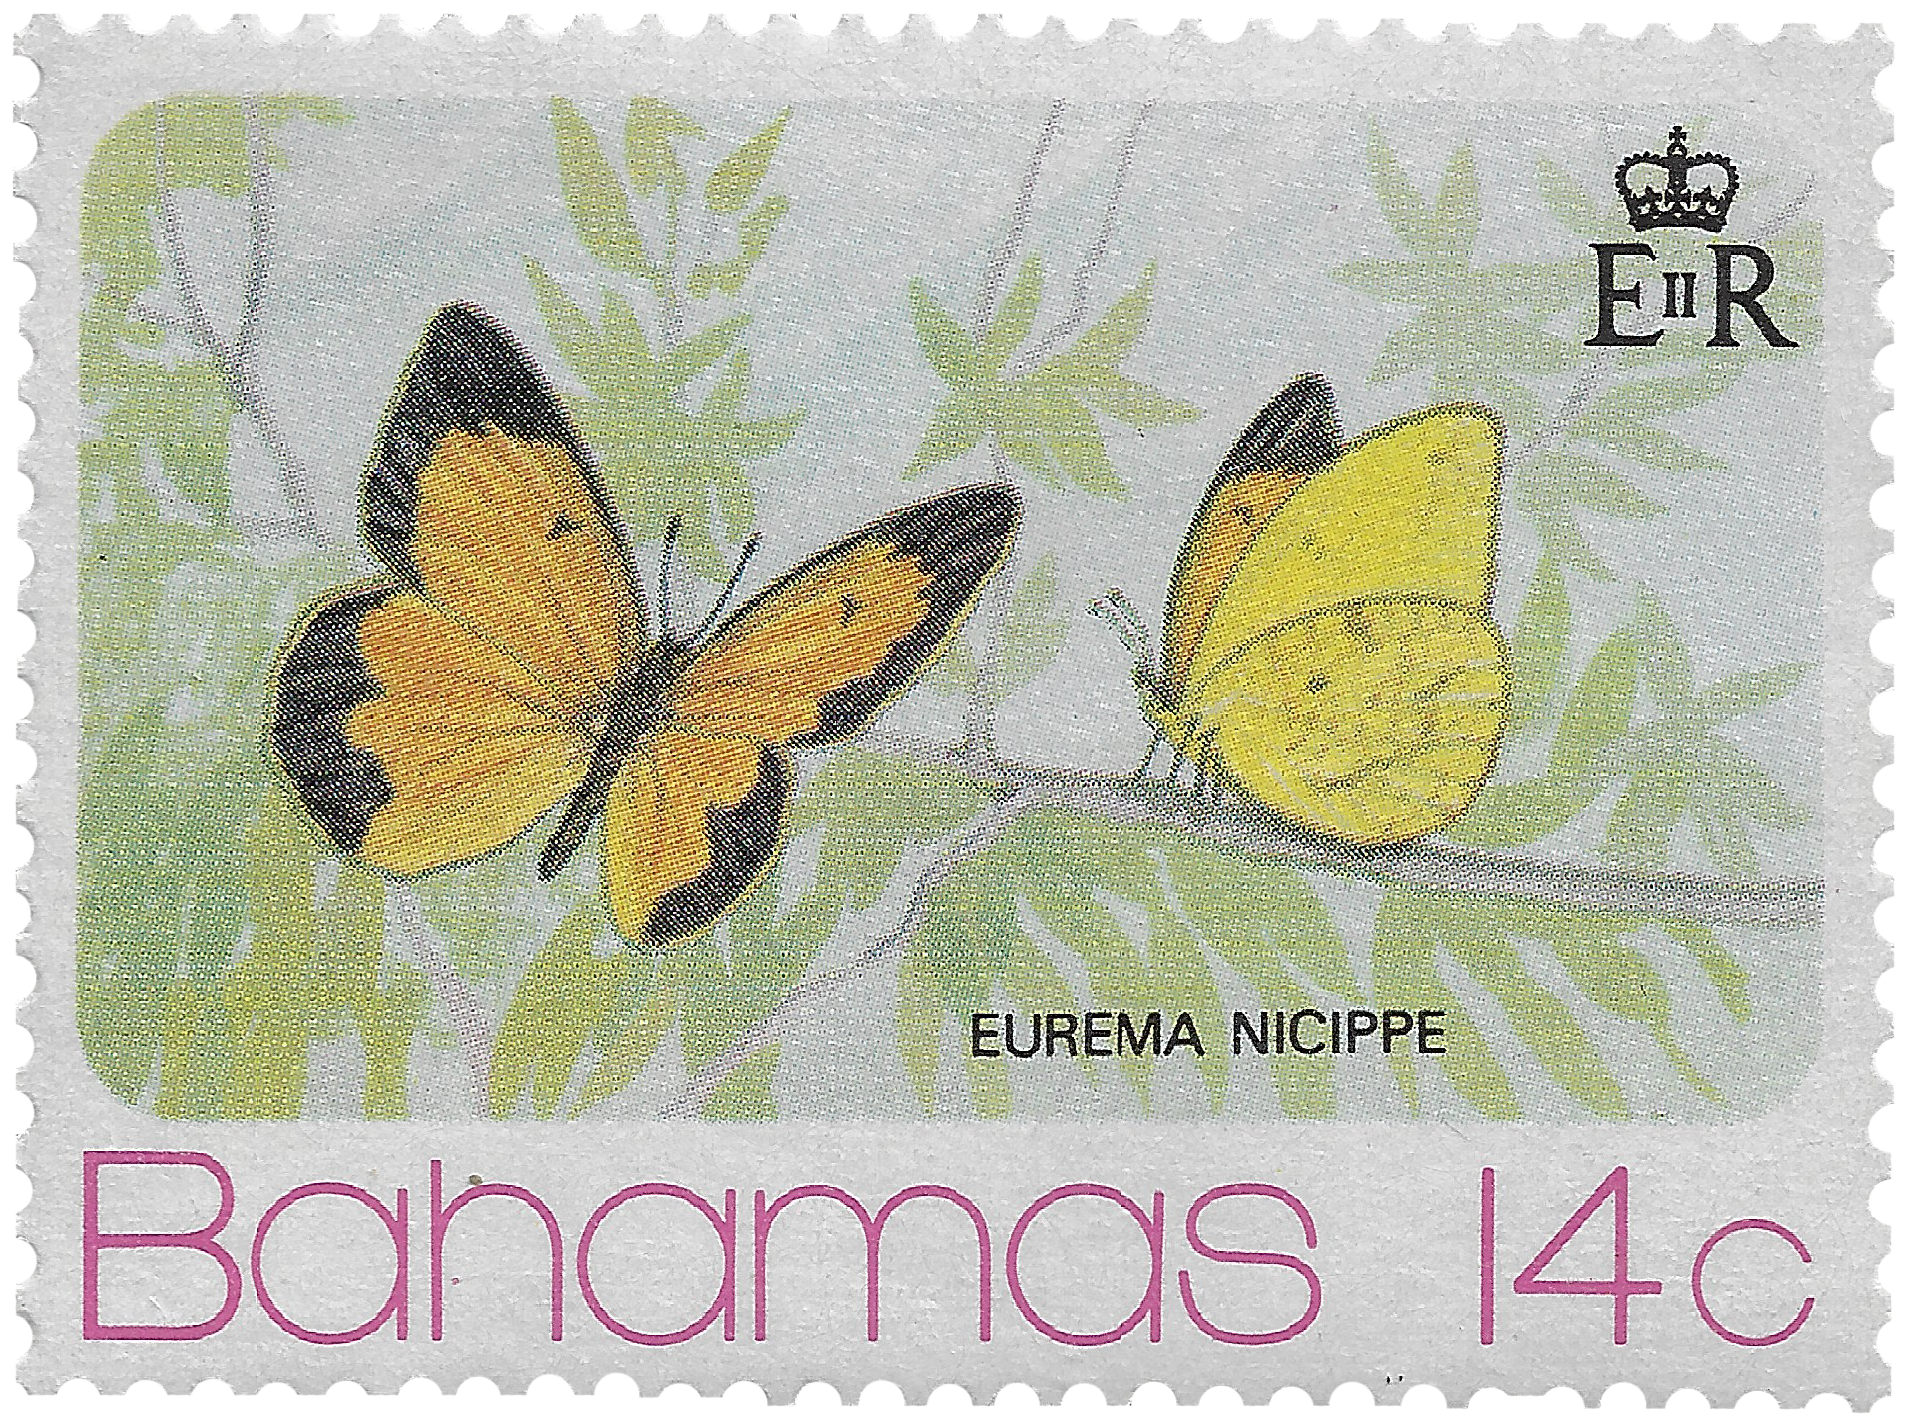 14c 1975, Eurema Nicippe, Butterfly